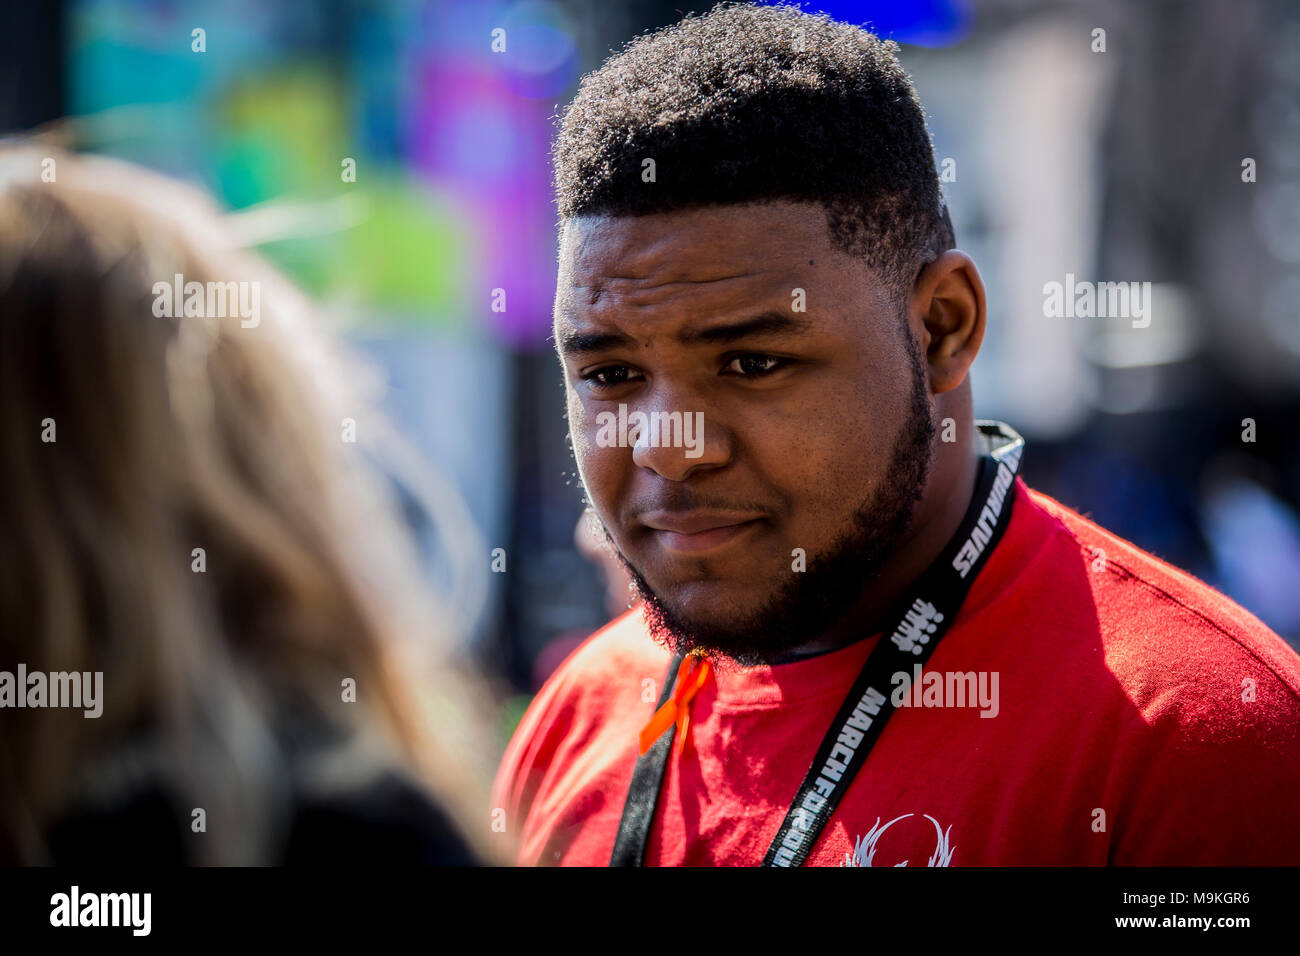 Washington Dc, United States. 24th Mar, 2018. D'Angelo McDade: 'We are survivors of a cruel and silent nation.' Credit: Michael Nigro/Alamy Live News Stock Photo